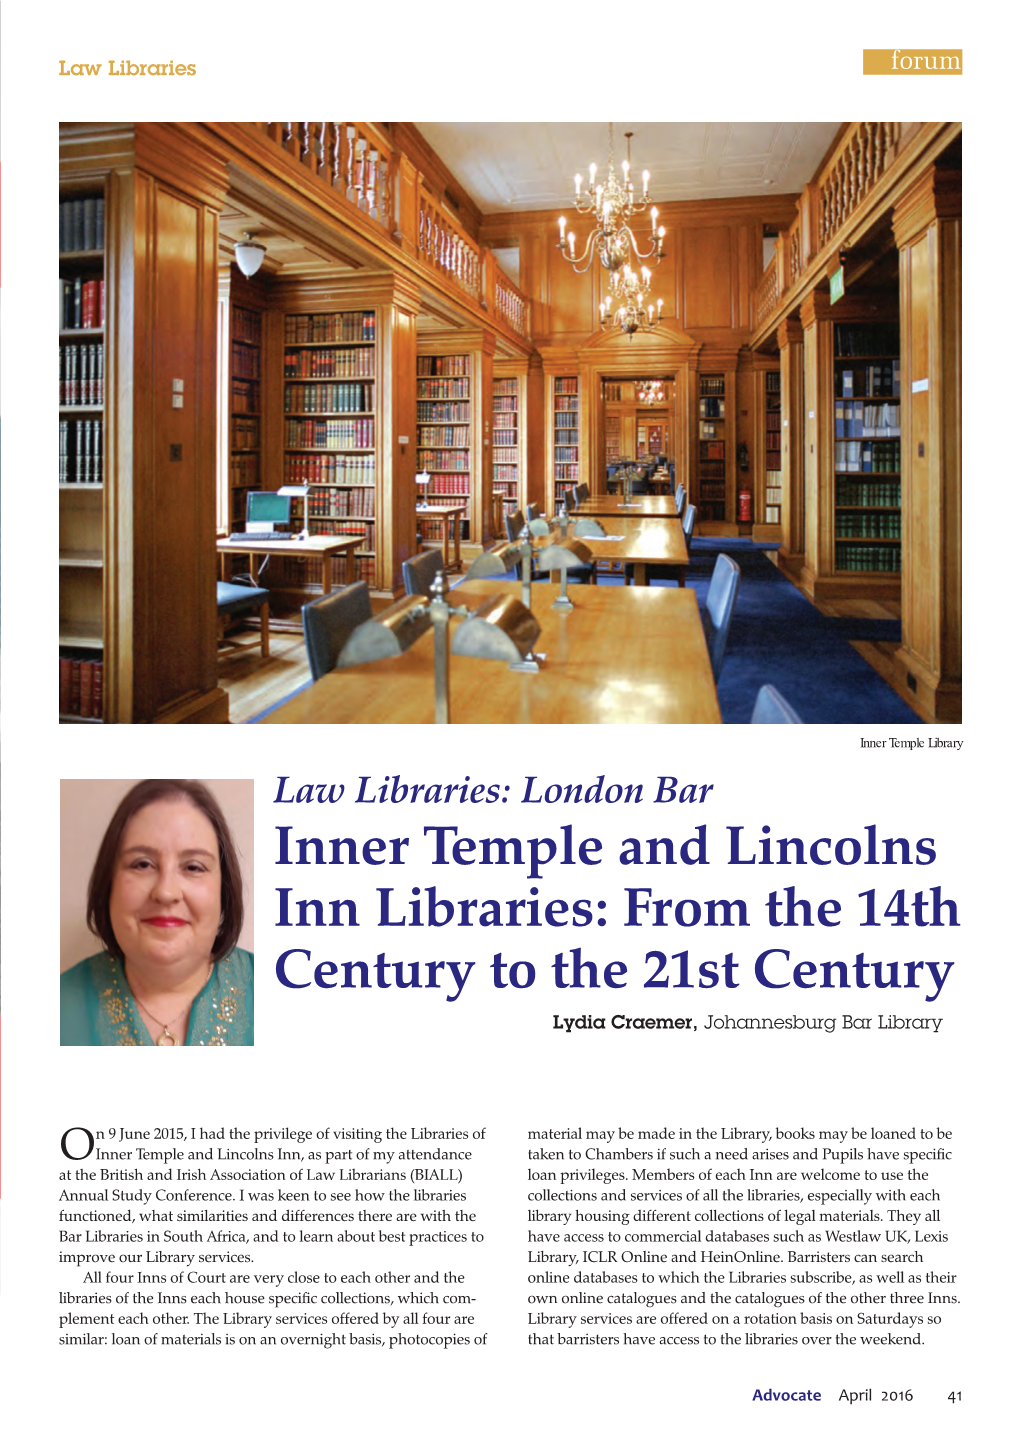 Inner Temple and Lincolns Inn Libraries: from the 14Th Century to the 21St Century Lydia Craemer, Johannesburg Bar Library